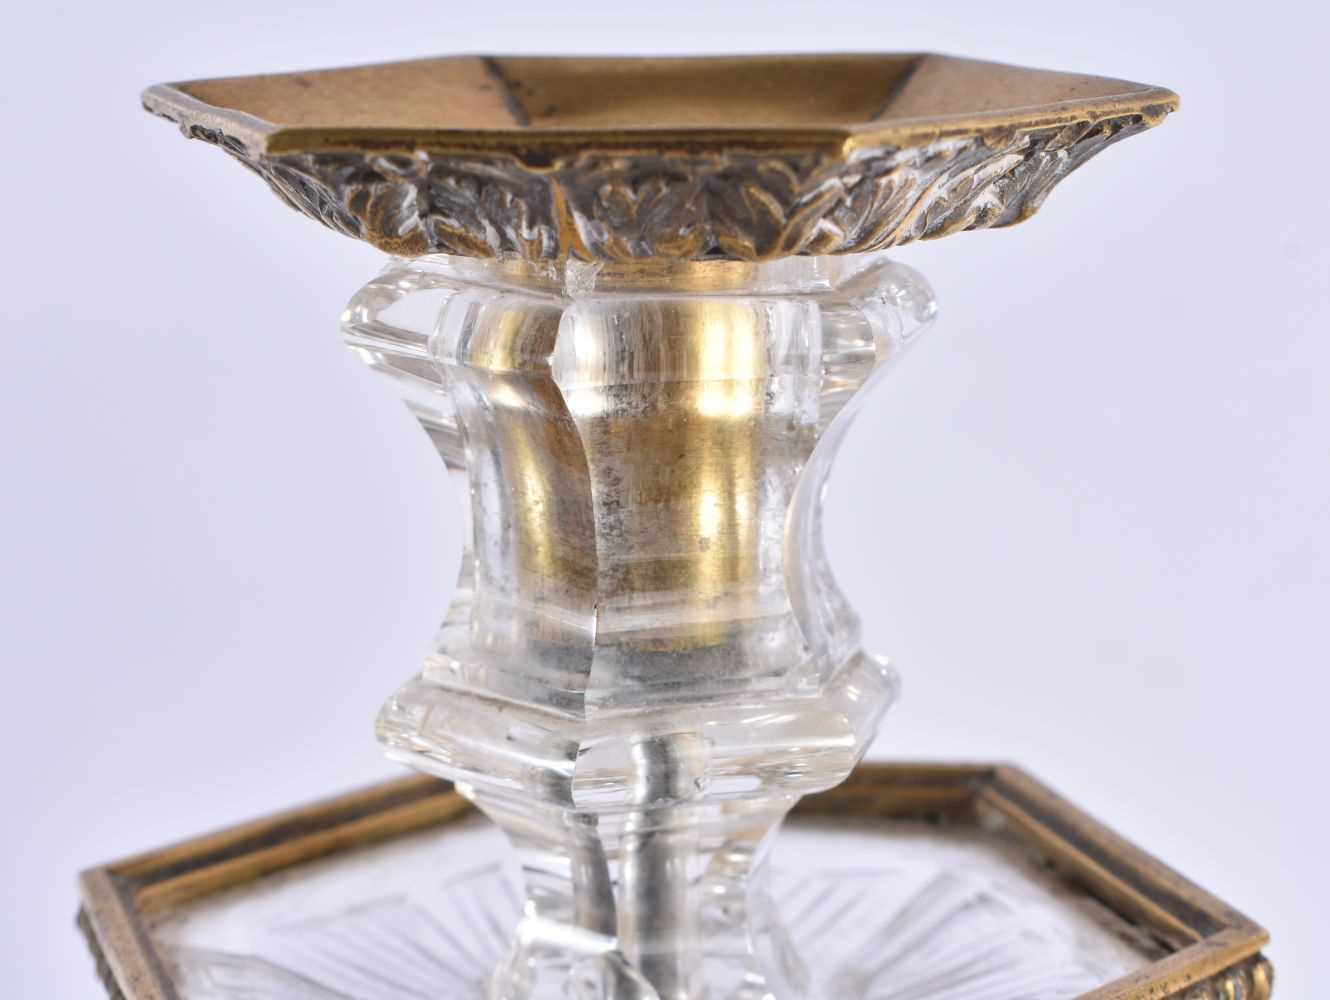 A FINE PAIR OF EARLY 19TH CENTURY CONTINENTAL BRONZE AND ROCK CRYSTAL CANDLESTICKS French of - Image 2 of 8